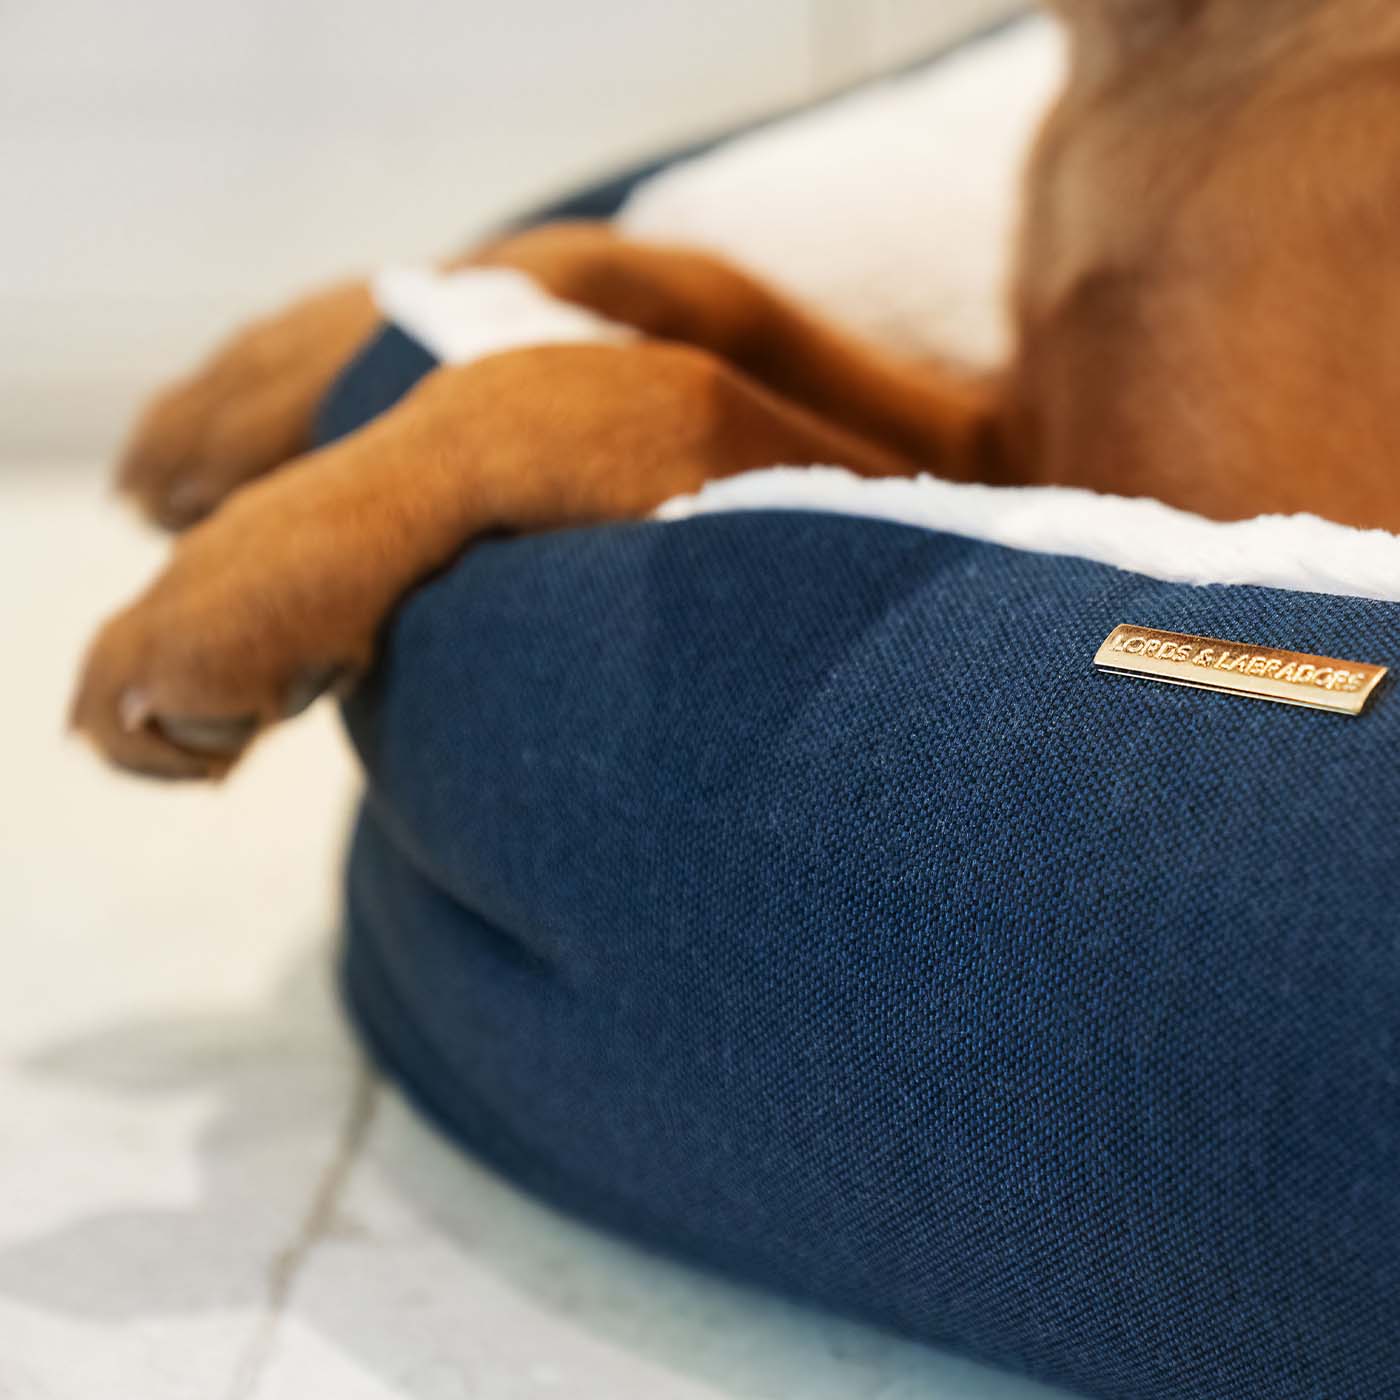 Discover This Luxurious Box Bed For Dogs, Made Using Beautiful Twill Fabric To Craft The Perfect Dog Box Bed! In Stunning Navy Denim, Available Now at Lords & Labradors    